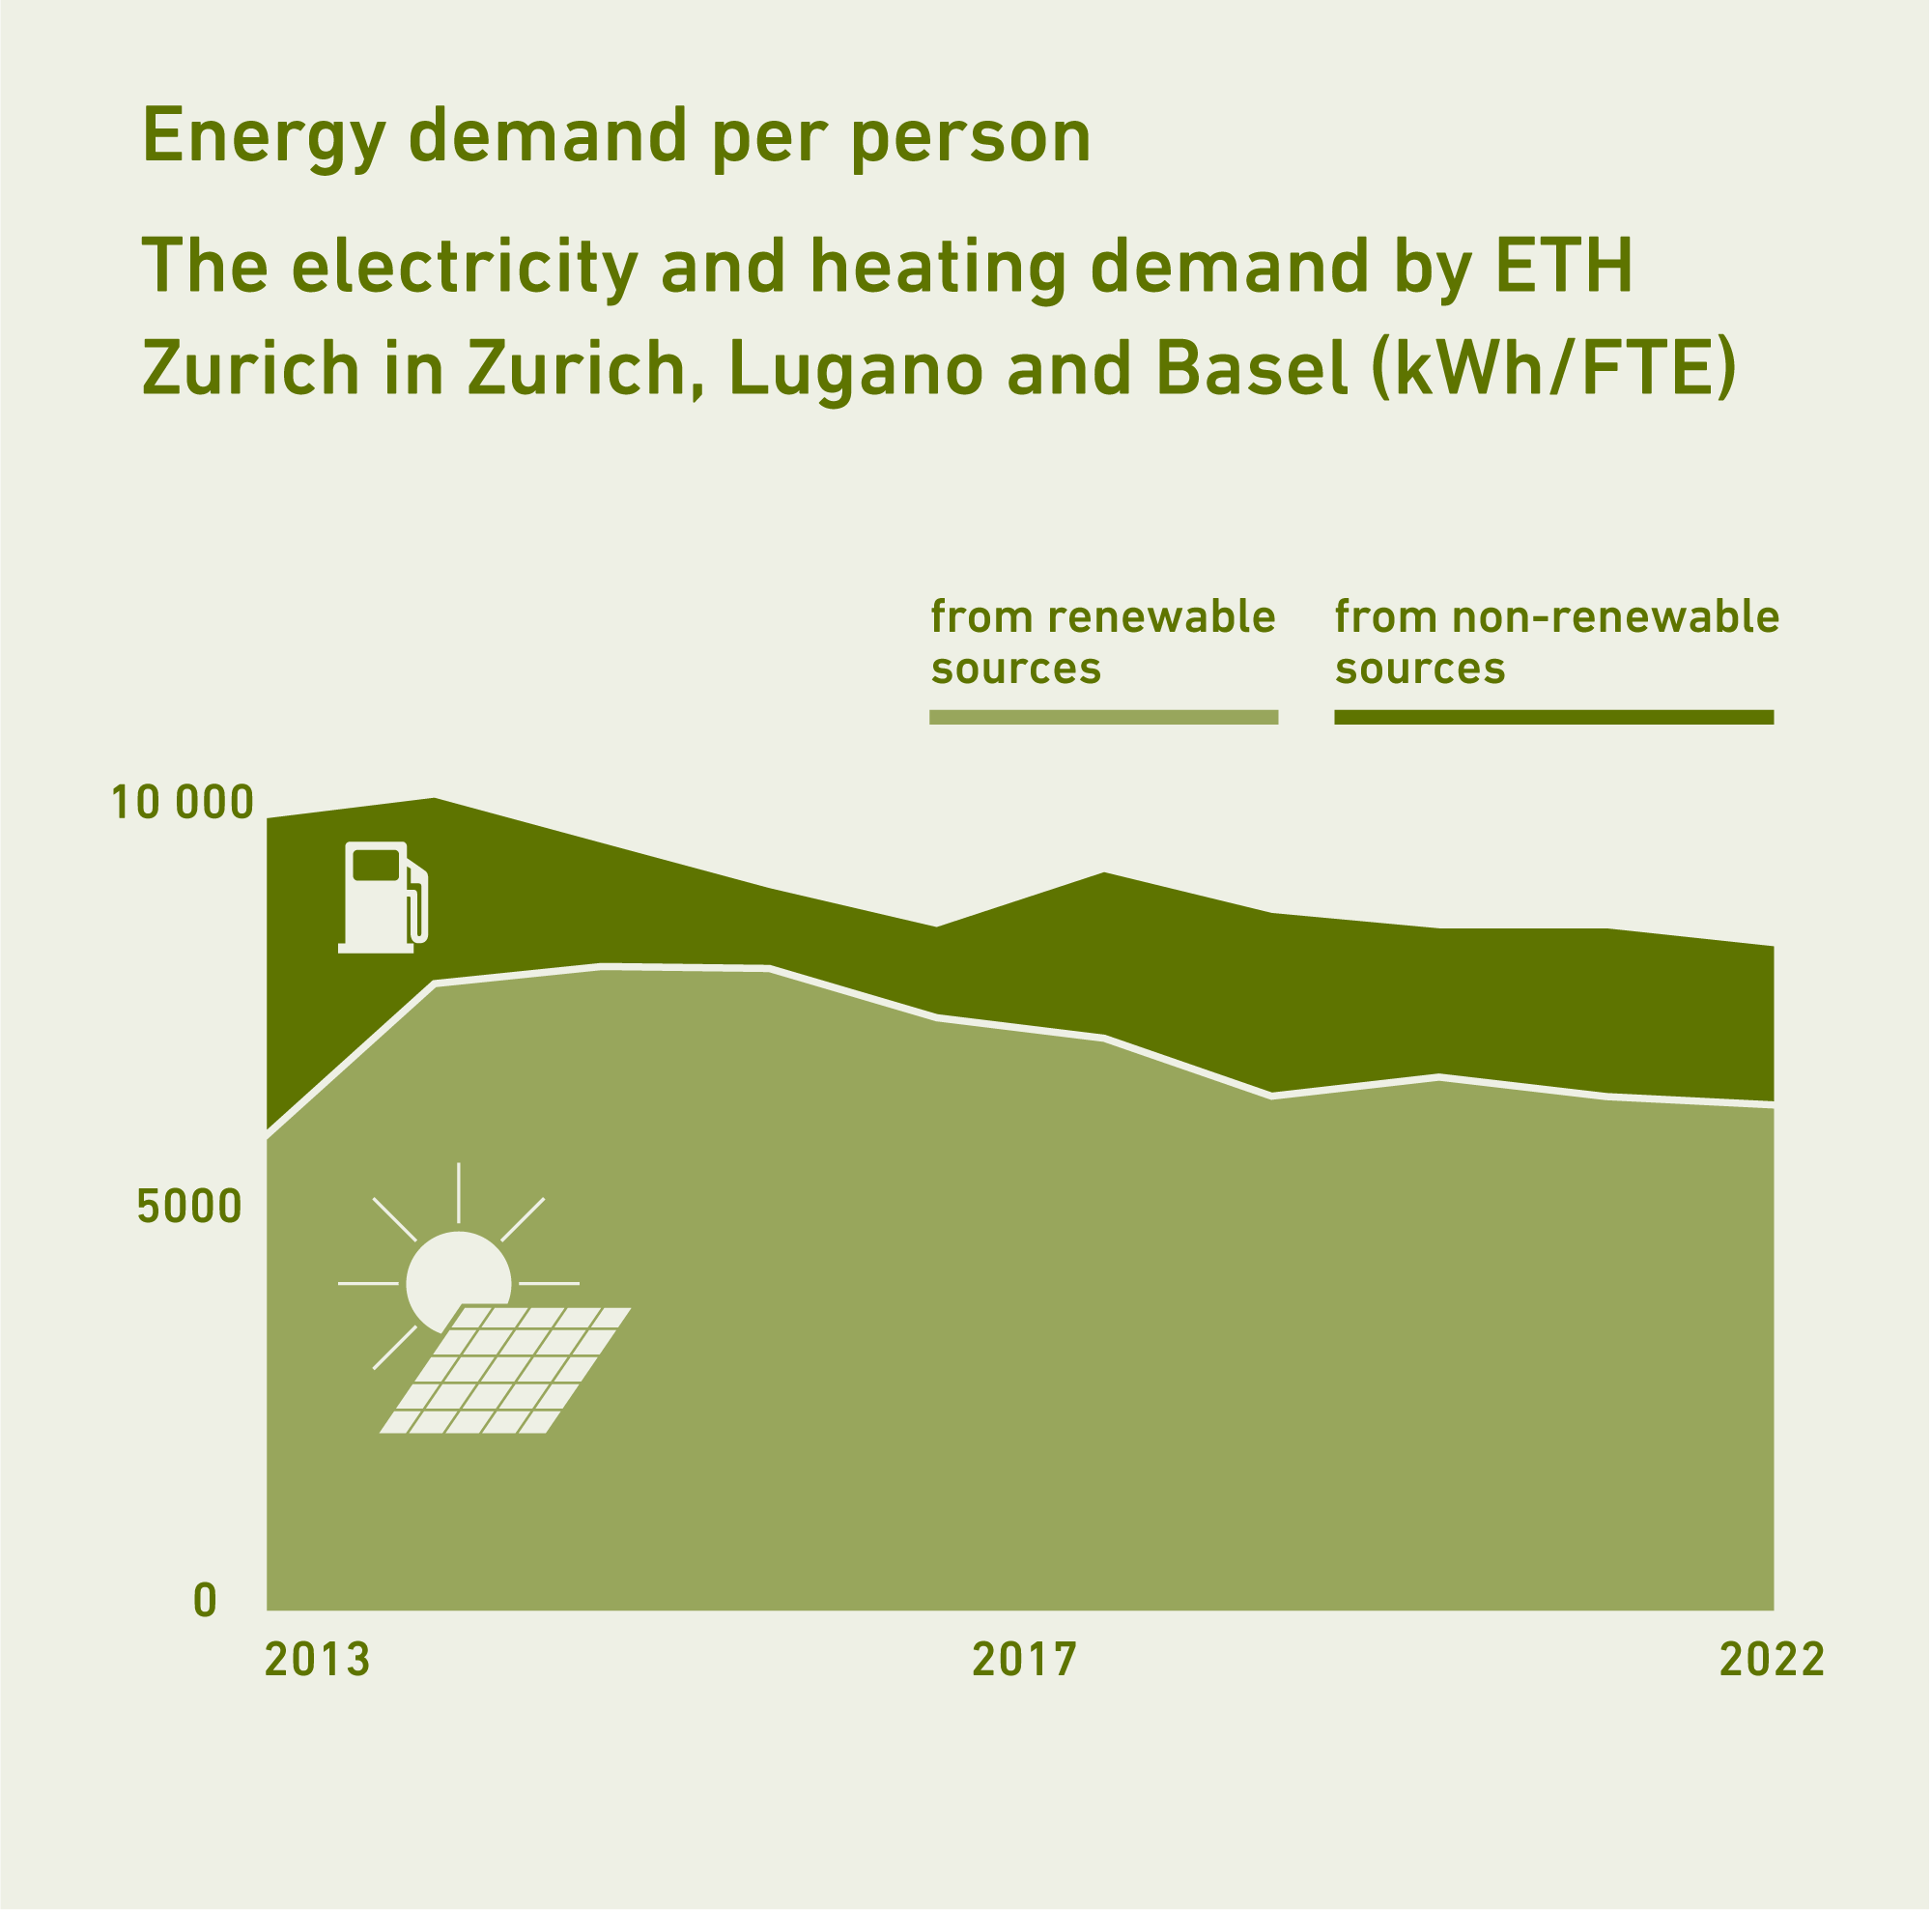 Enlarged view: The graph shows the energy consumption of ETH Zurich per person.